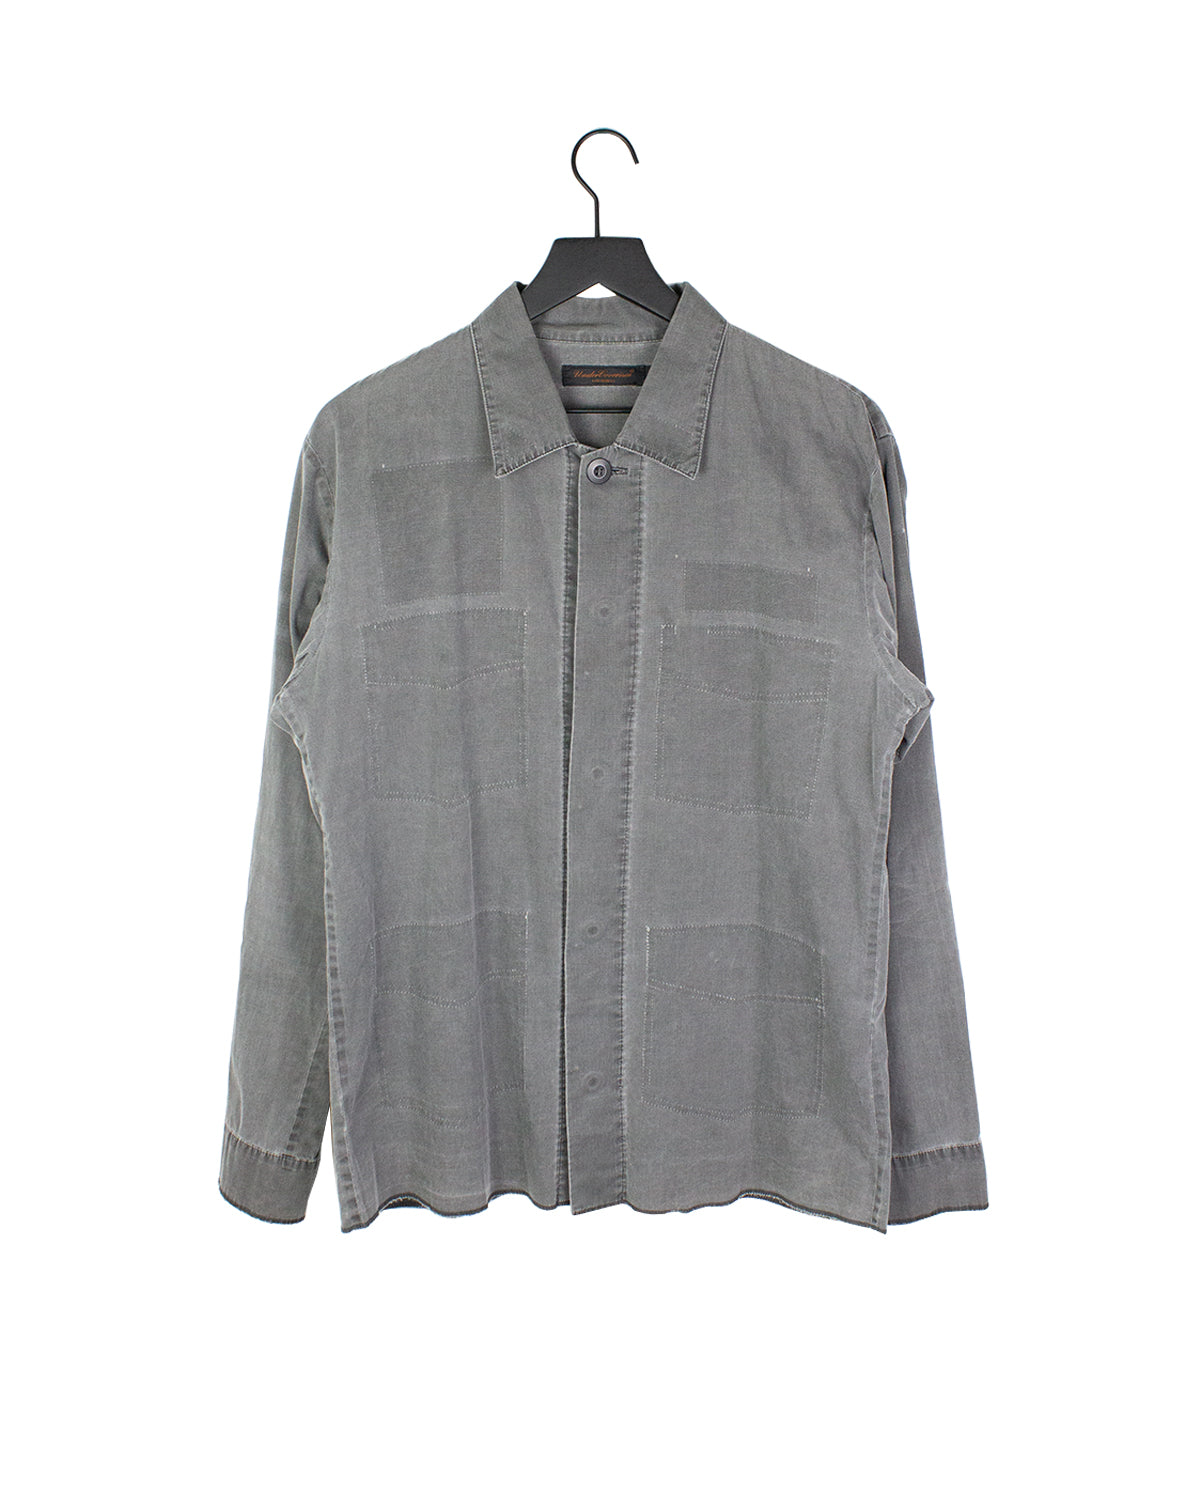 Undercover SCAB Long Sleeve Button Up Shirt 